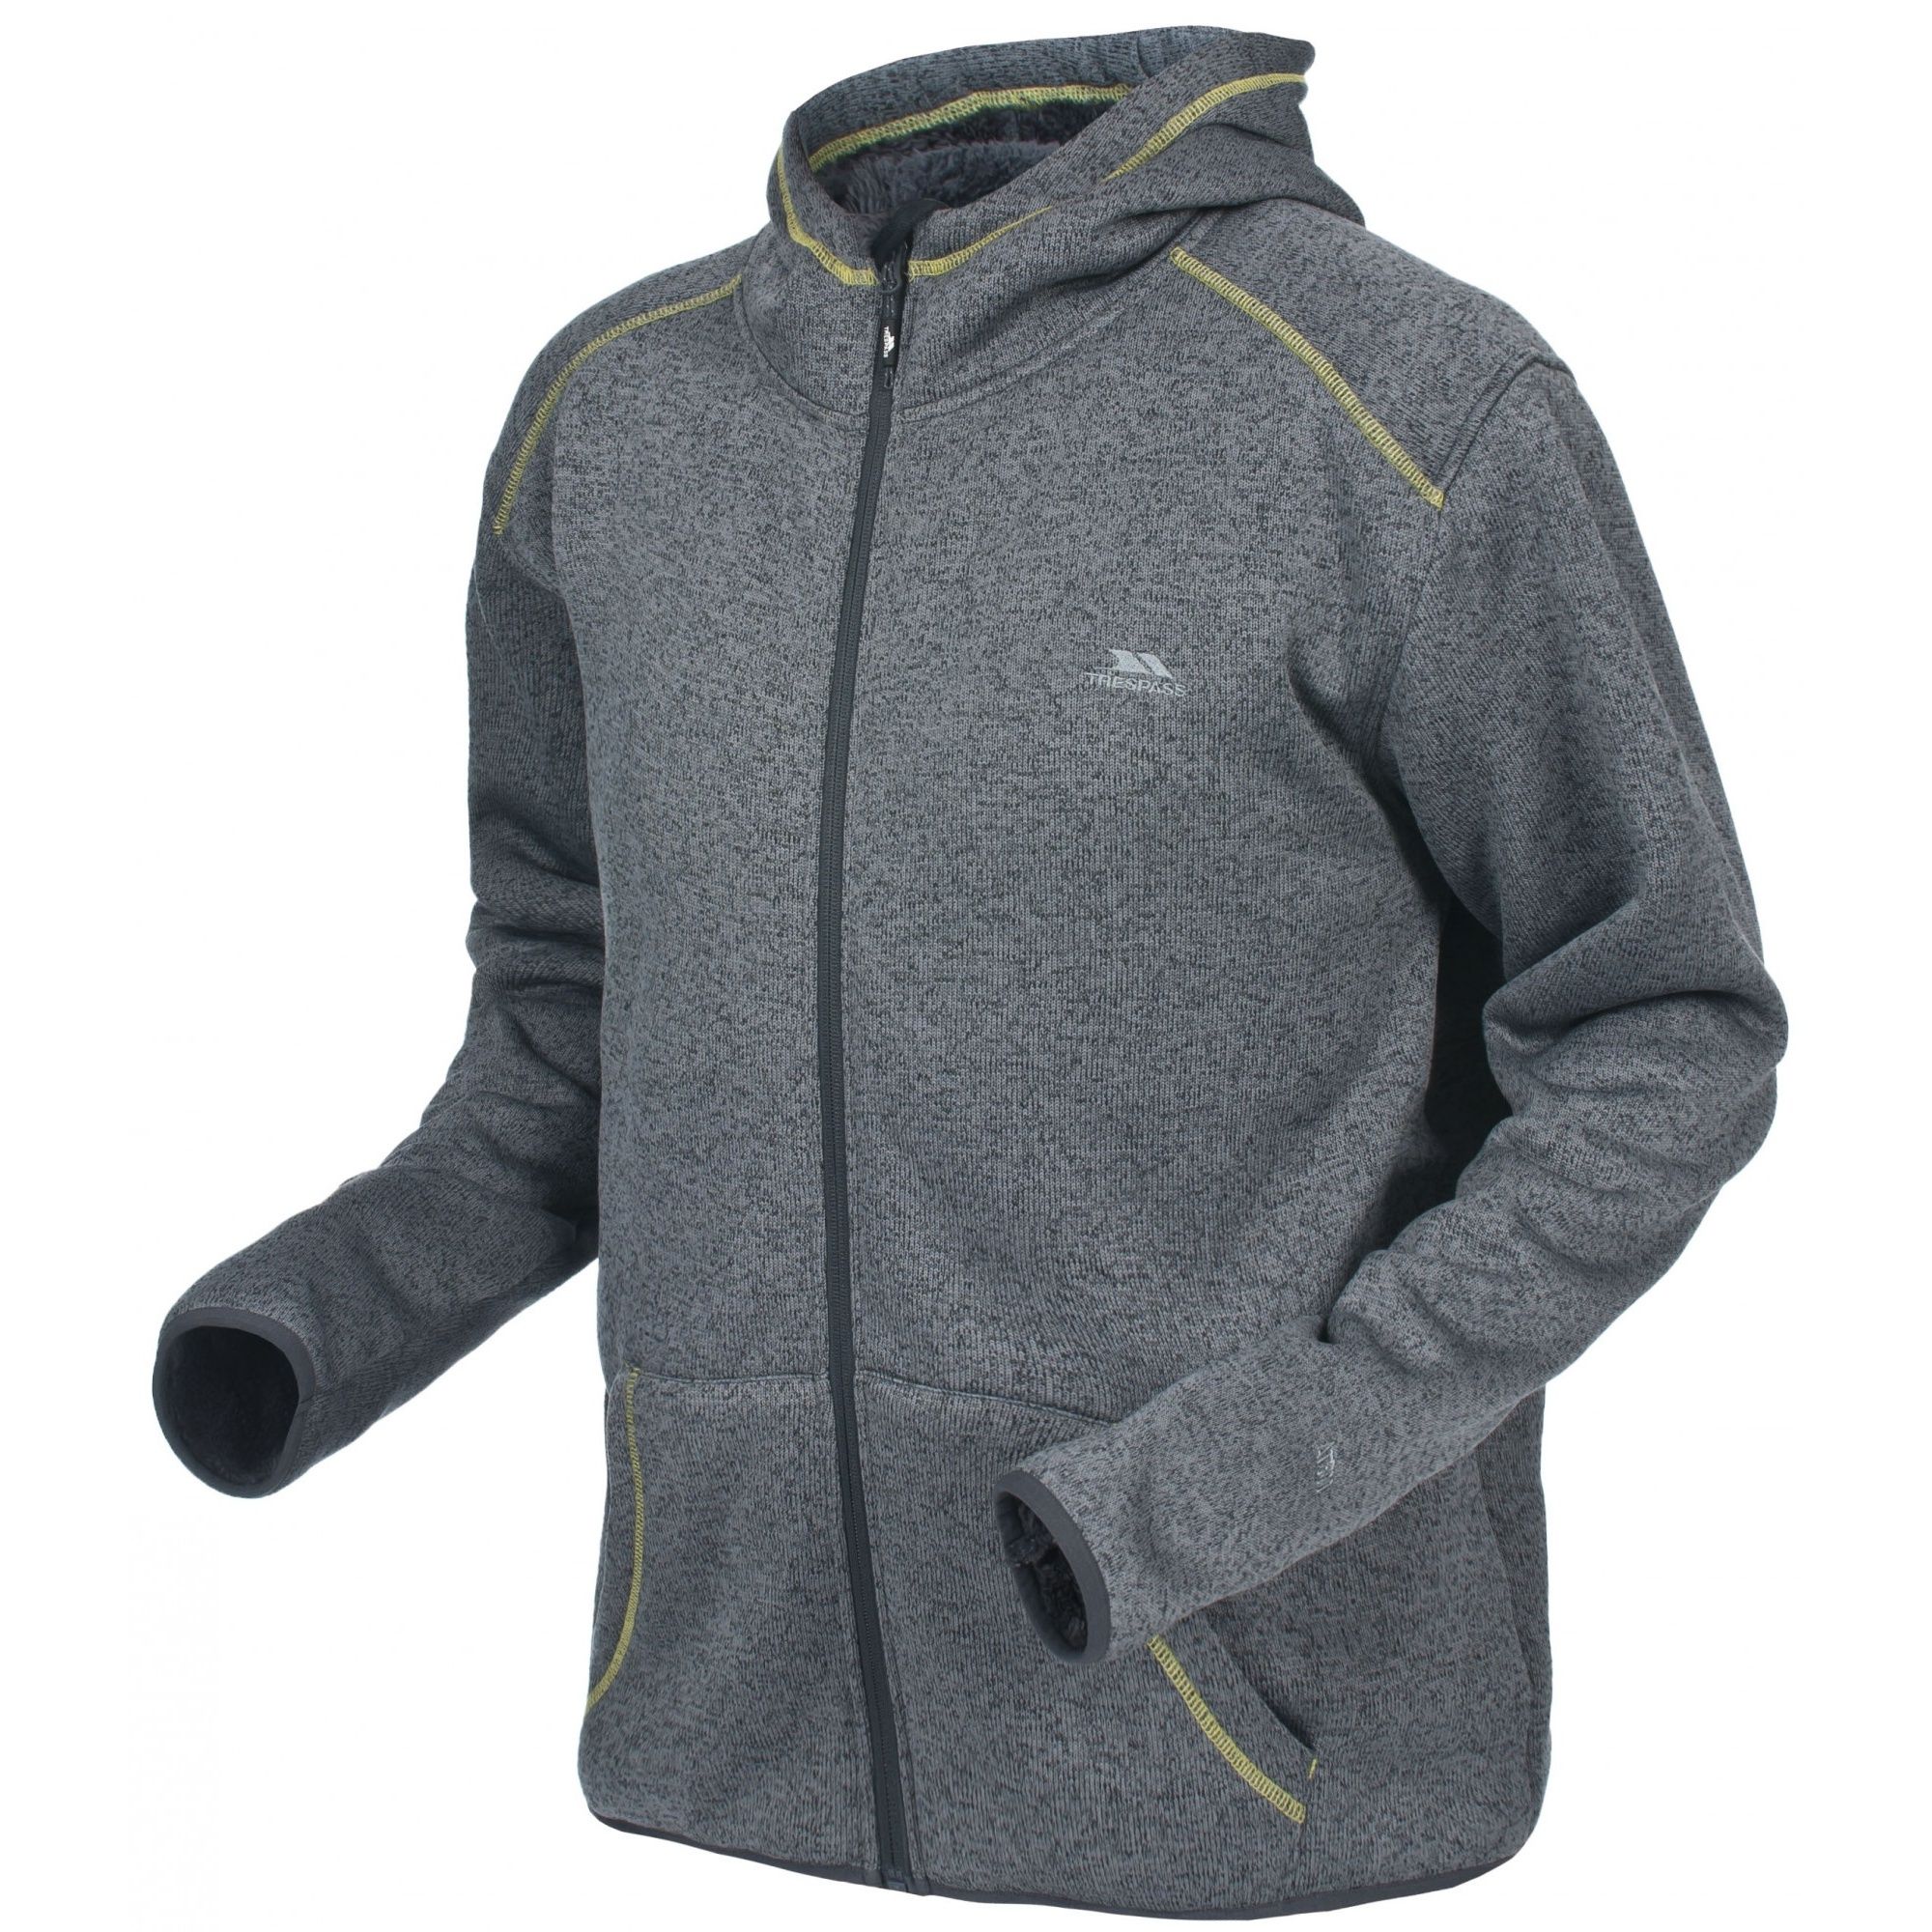 Hooded knitted fleece. Full zip front. 2 pockets. Contrast coverstitch detail. Binding at hem and cuff. Airtrap. 500gsm. 100% Polyester.